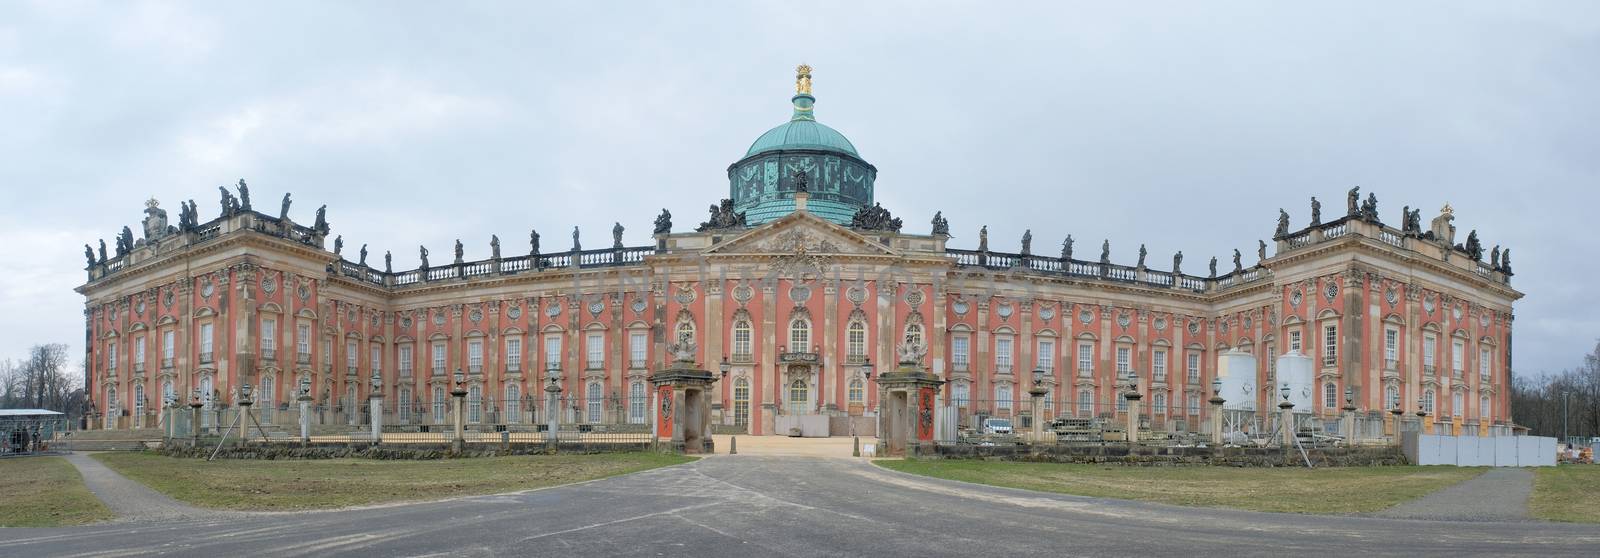 Panoramic view of Sans Souci palace in Potsdam, Berlin, Germany, by Surasak